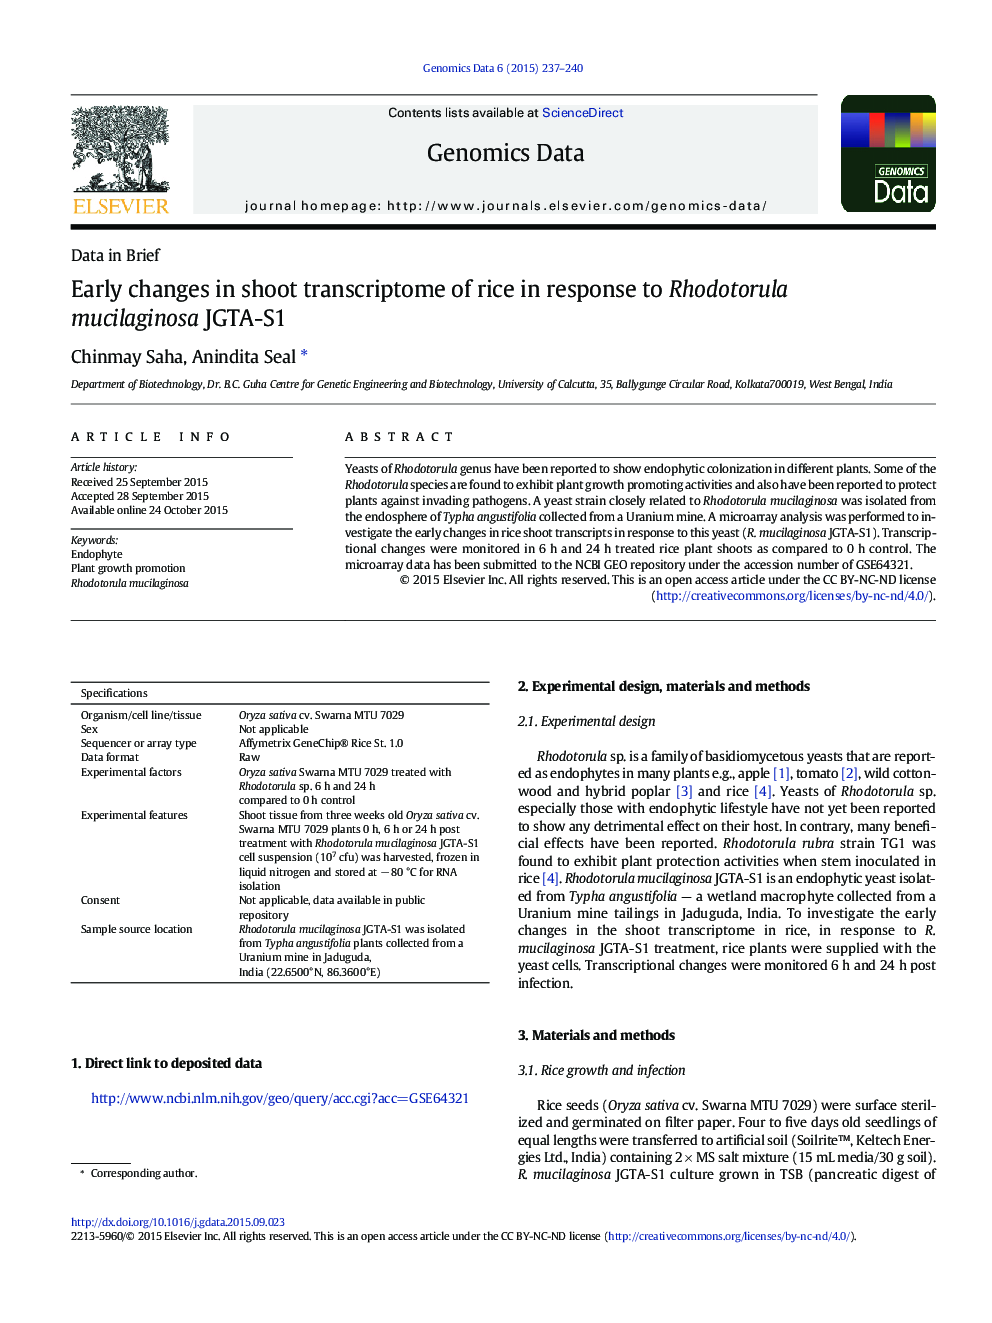 Early changes in shoot transcriptome of rice in response to Rhodotorula mucilaginosa JGTA-S1